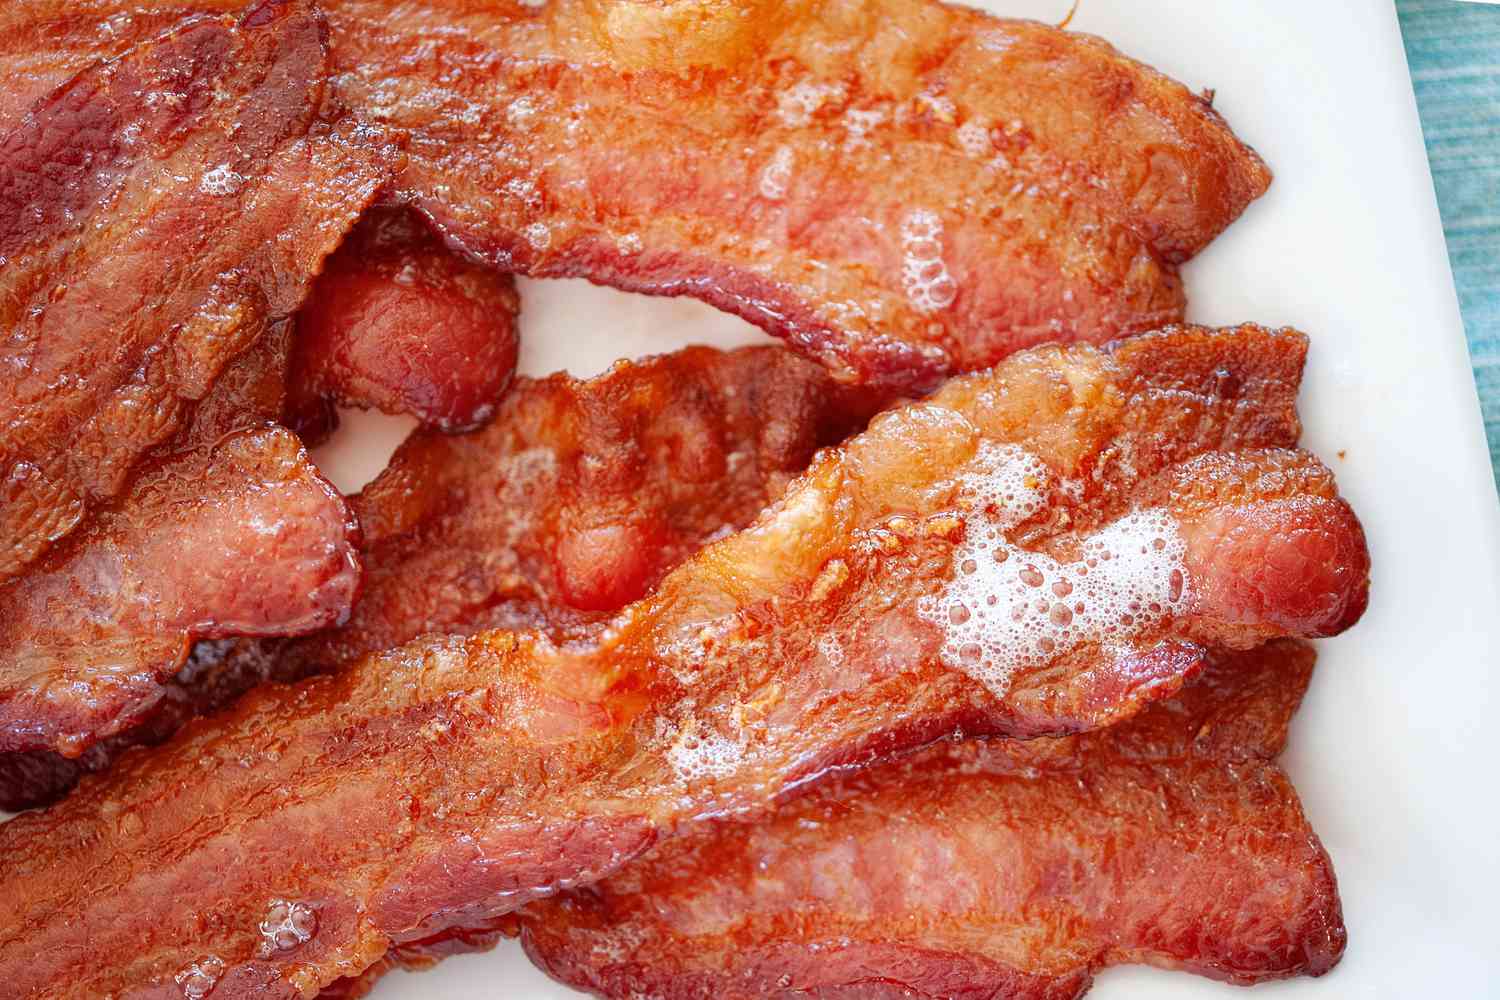 What temperature do I bake my bacon in the oven?